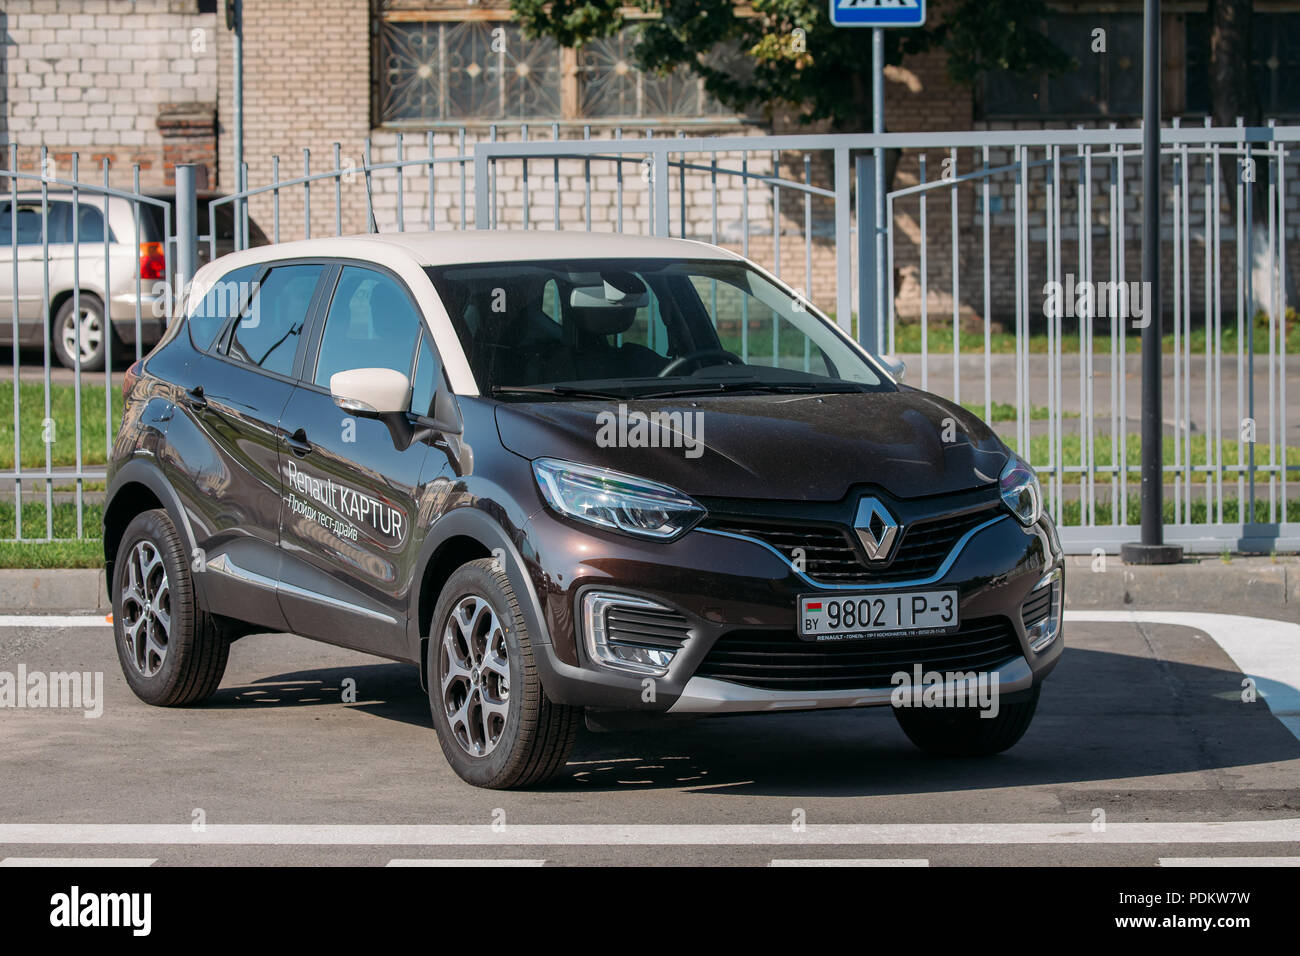 Gomel, Belarus - June 31, 2018: Black Color Renault Kaptur Car Is The Subcompact Crossover Parking In Street. Renault Kaptur Produced Jointly By Renau Stock Photo